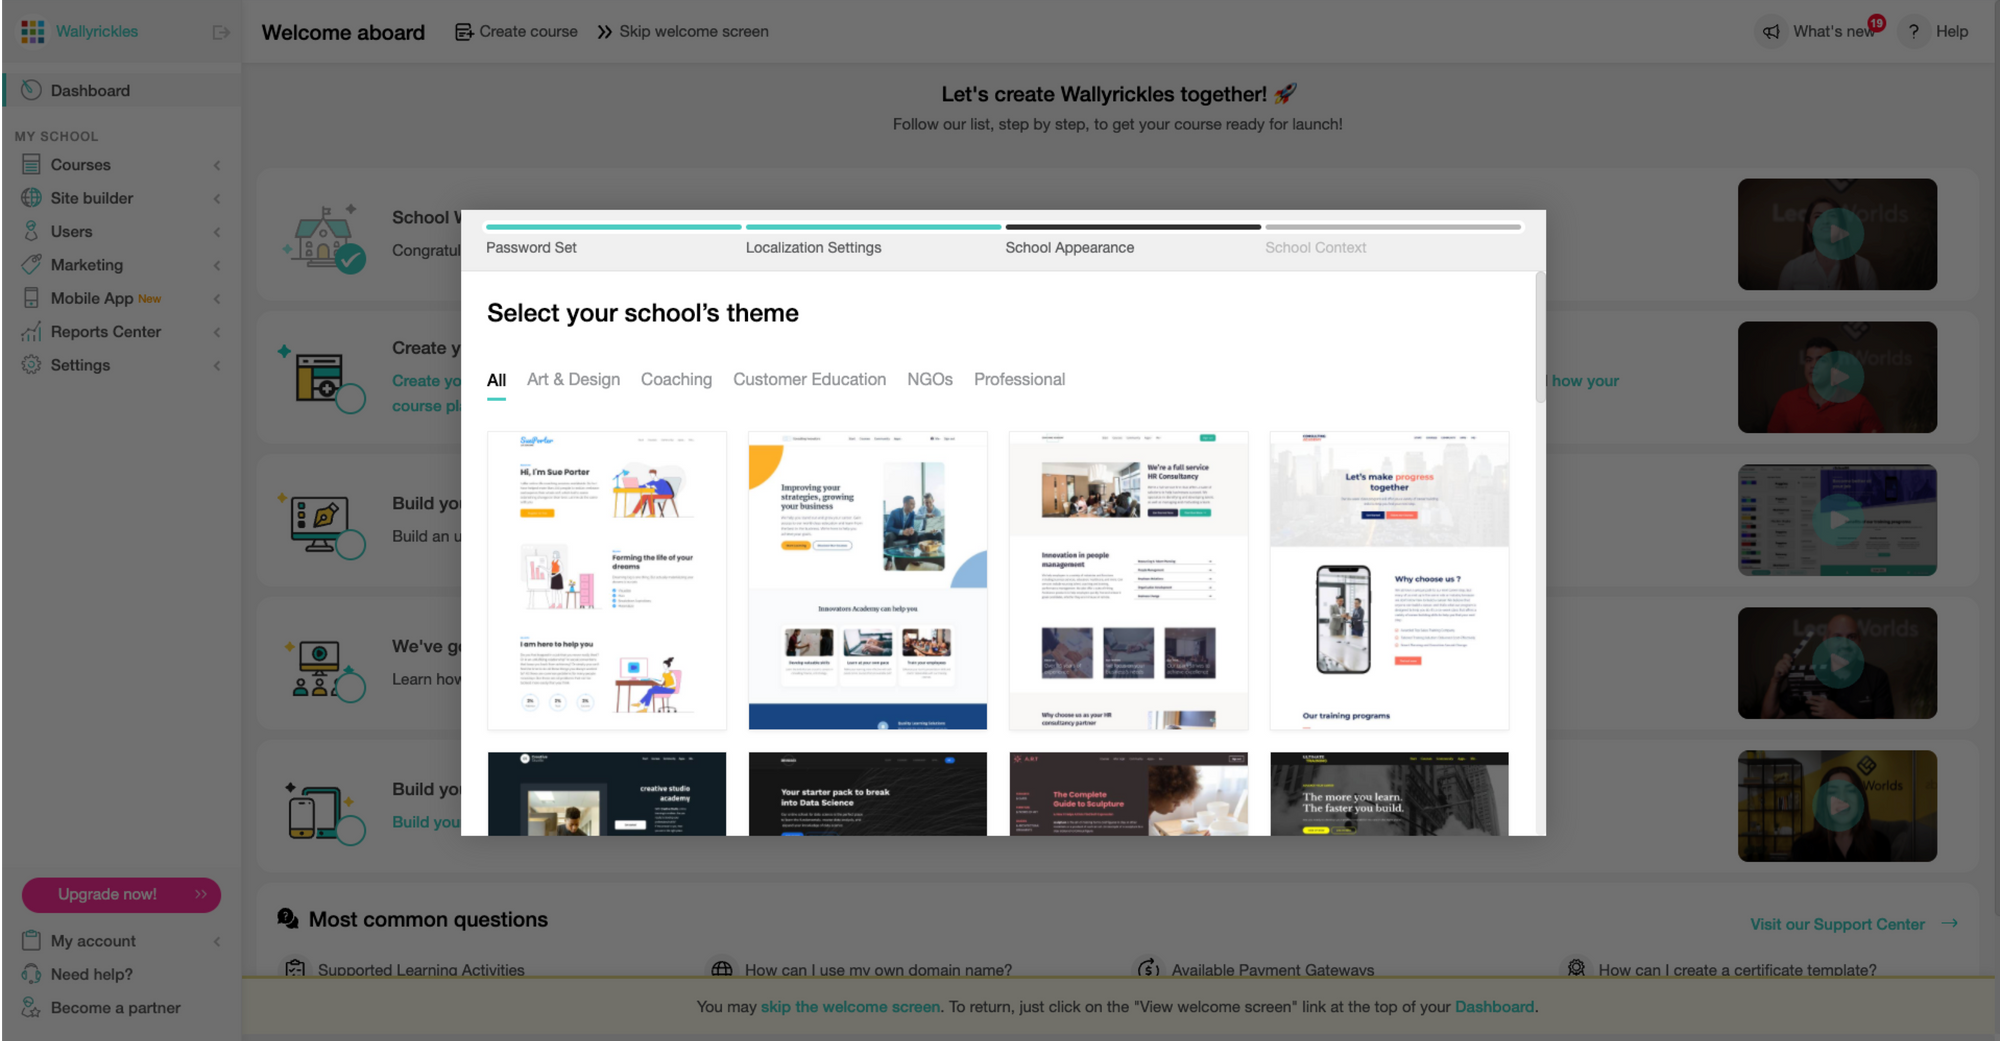 LearnWorlds Review: All the Tools for Selling Online Courses